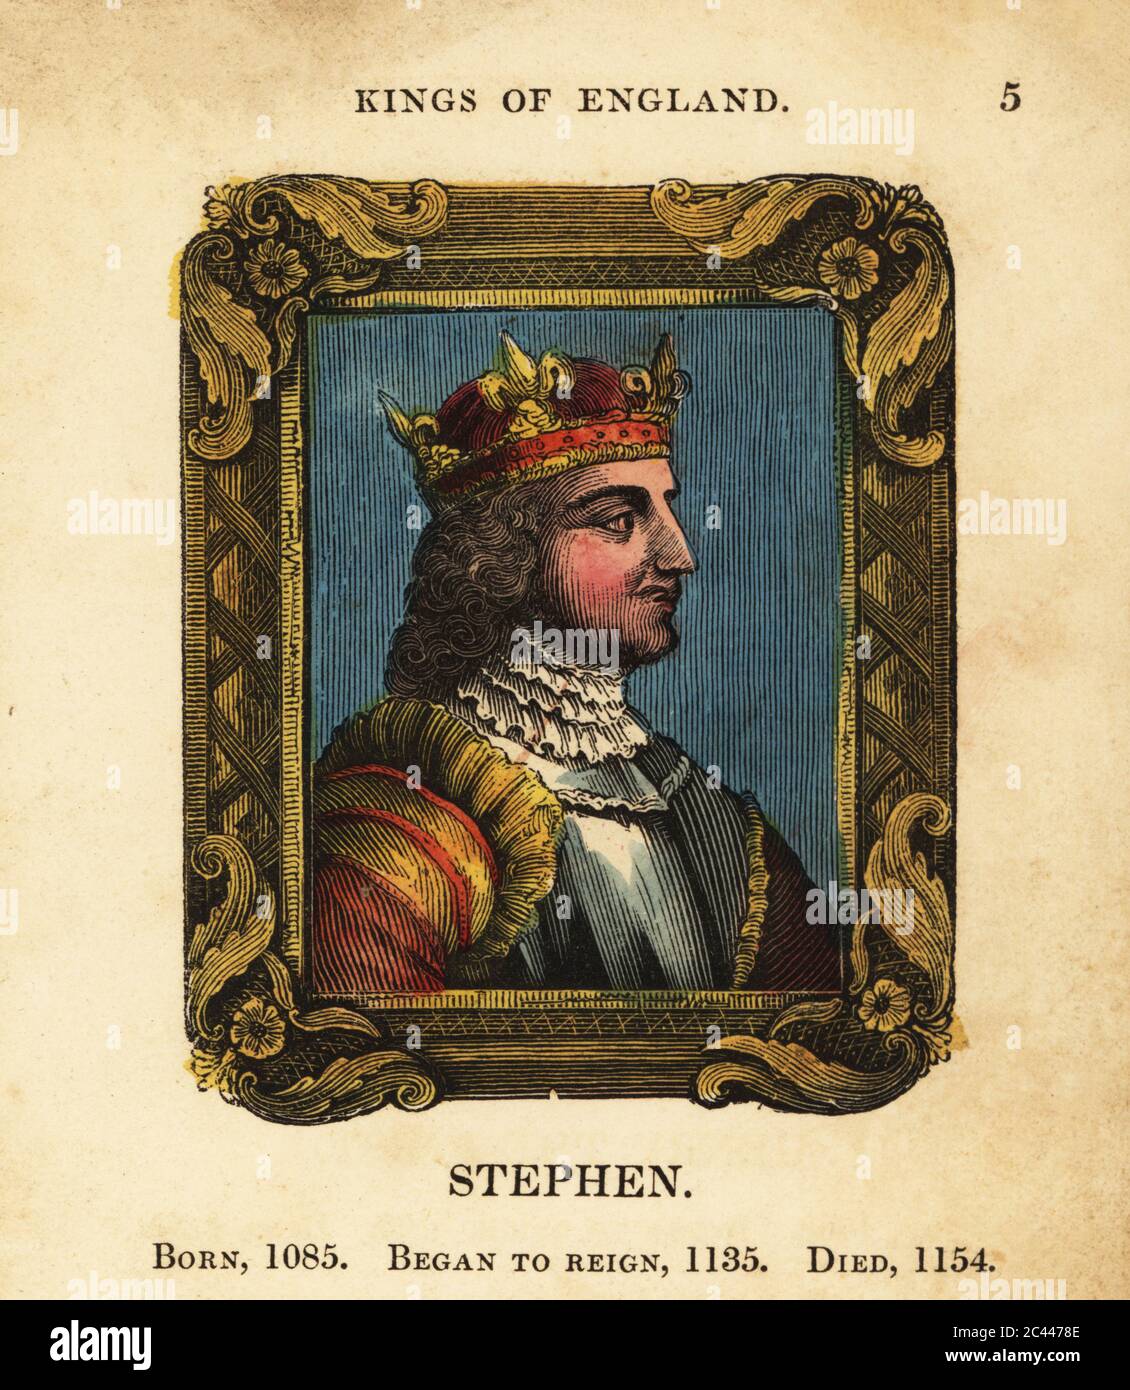 Portrait of King Stephen of England, born 1085, began reign 1135 and died 1154. In crown, lace collar, breastplate and cape within ornate frame. Handcolored engraving by Cosmo Armstrong from Portraits and Characters of the Kings of England, from William the Conqueror to George the Third, John Harris, London, 1830. Stock Photo